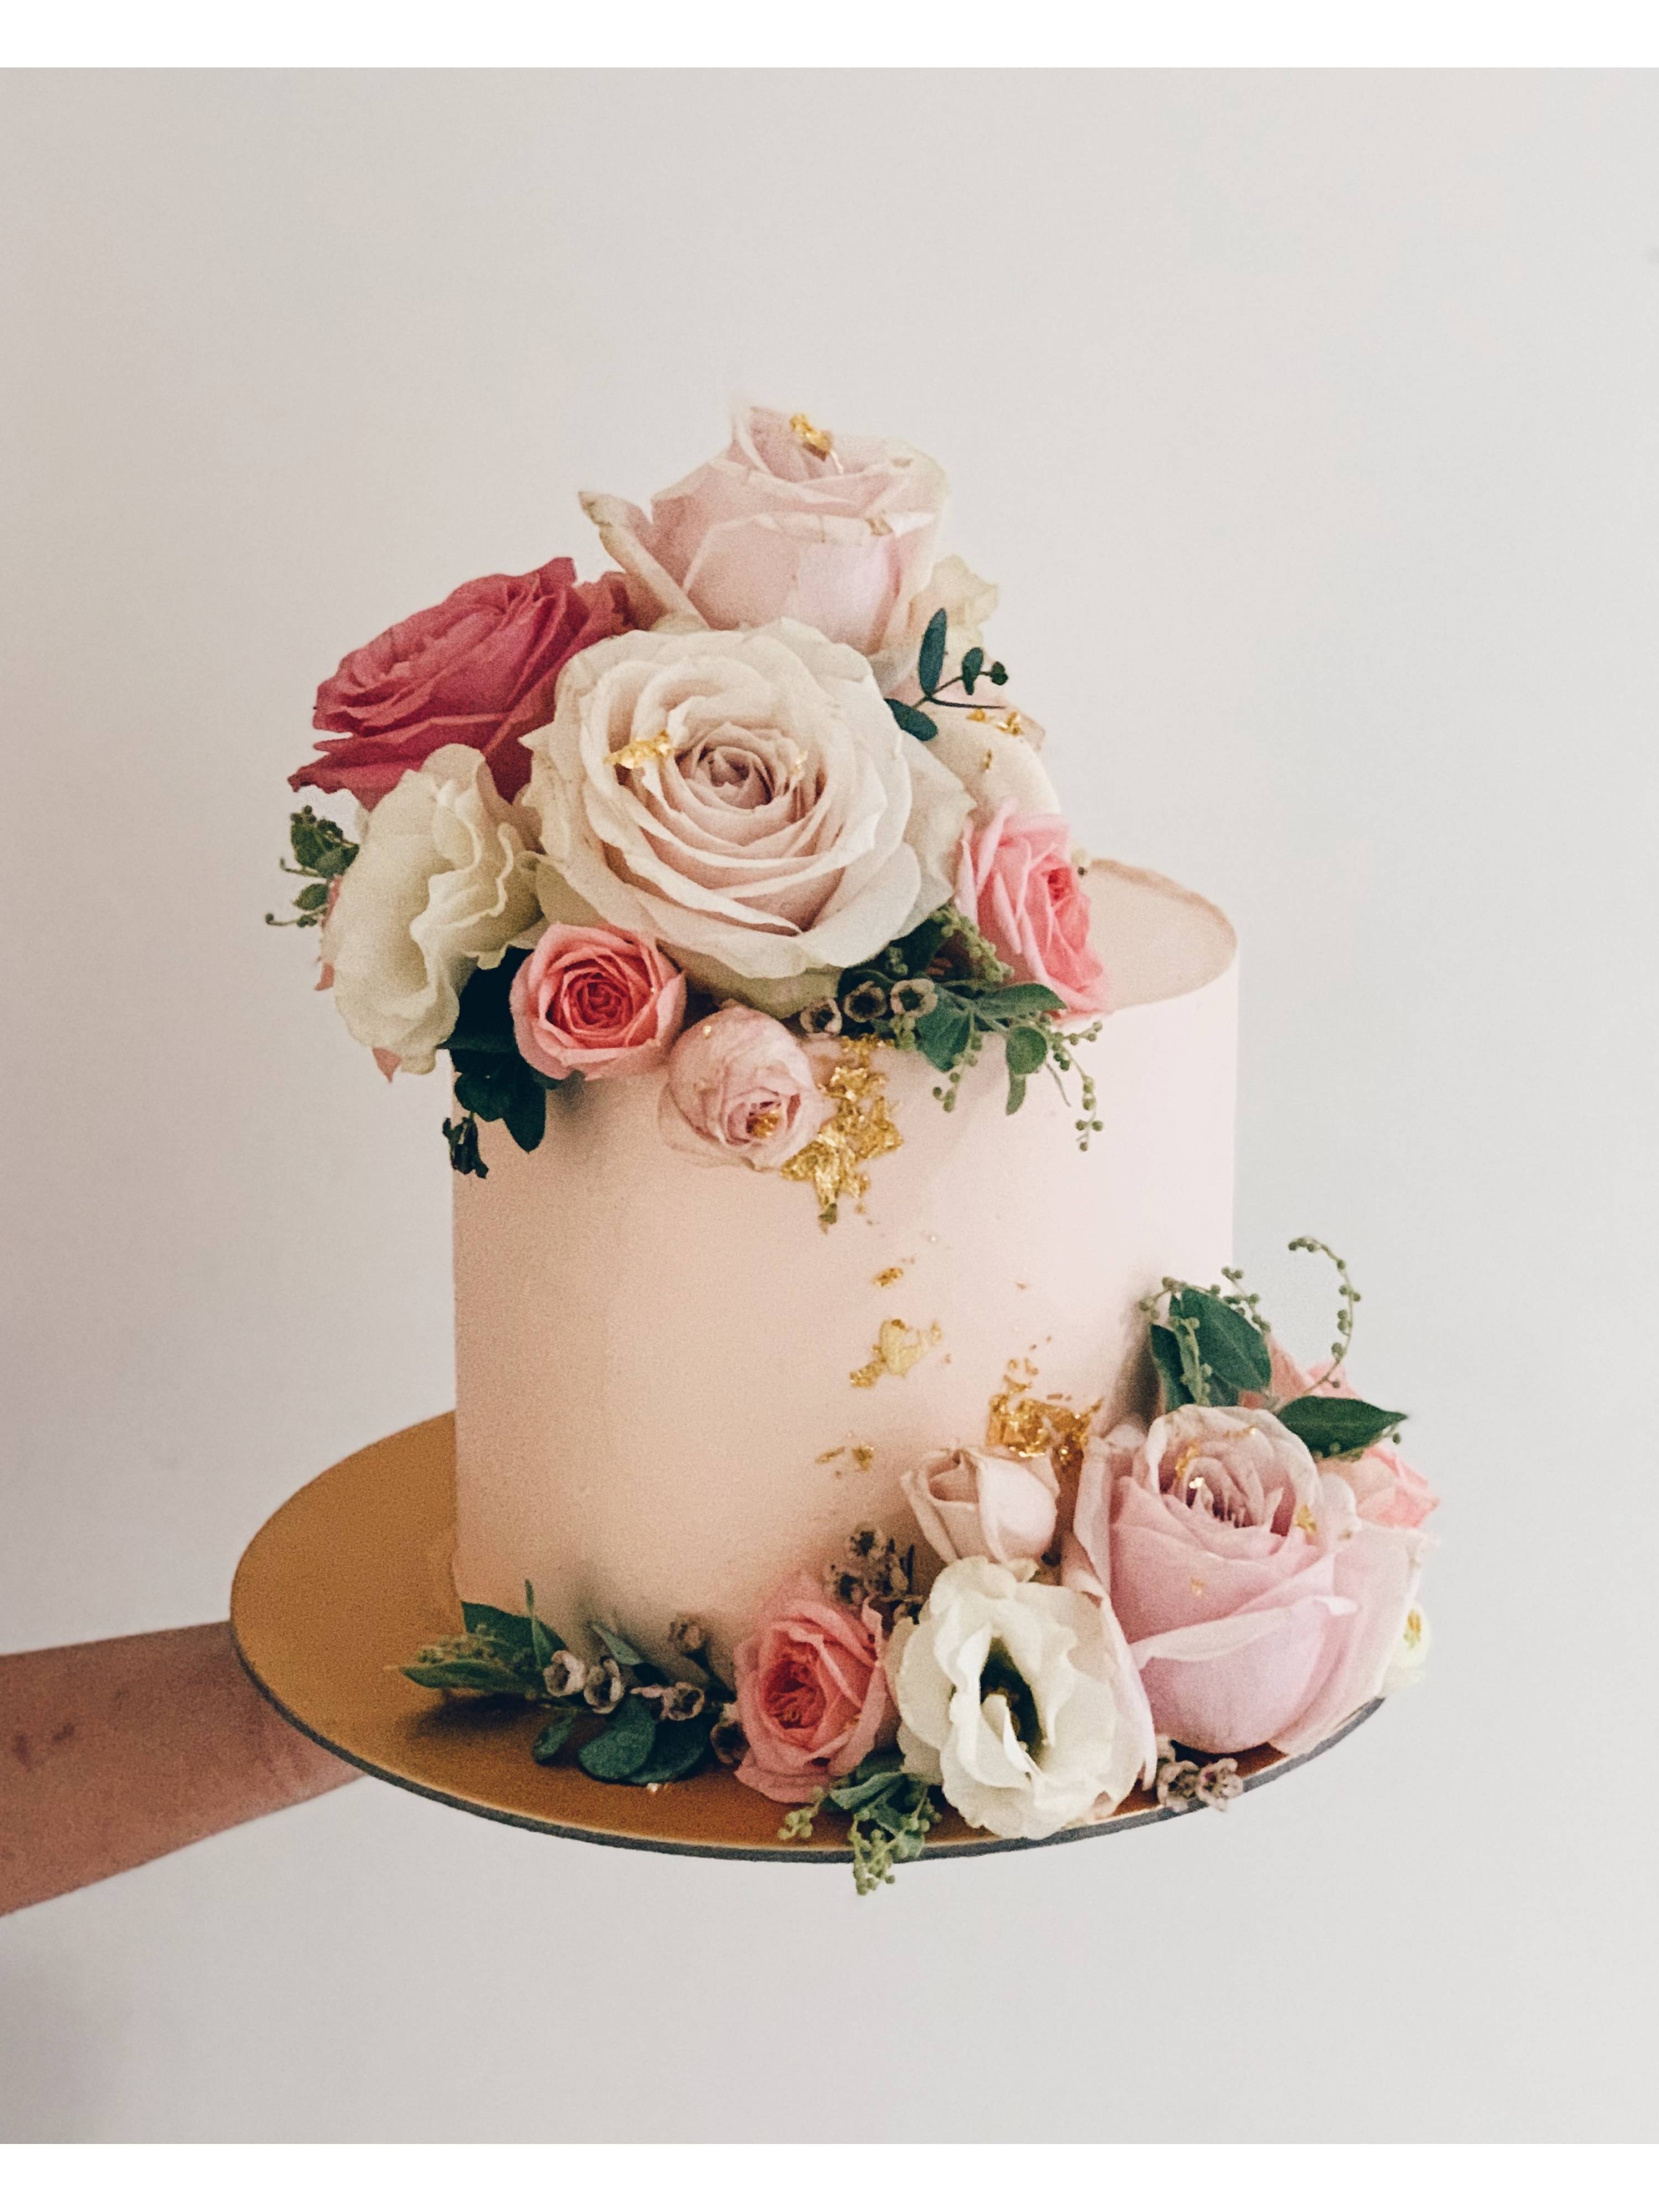 F10. Shades of Pink Floral Cake